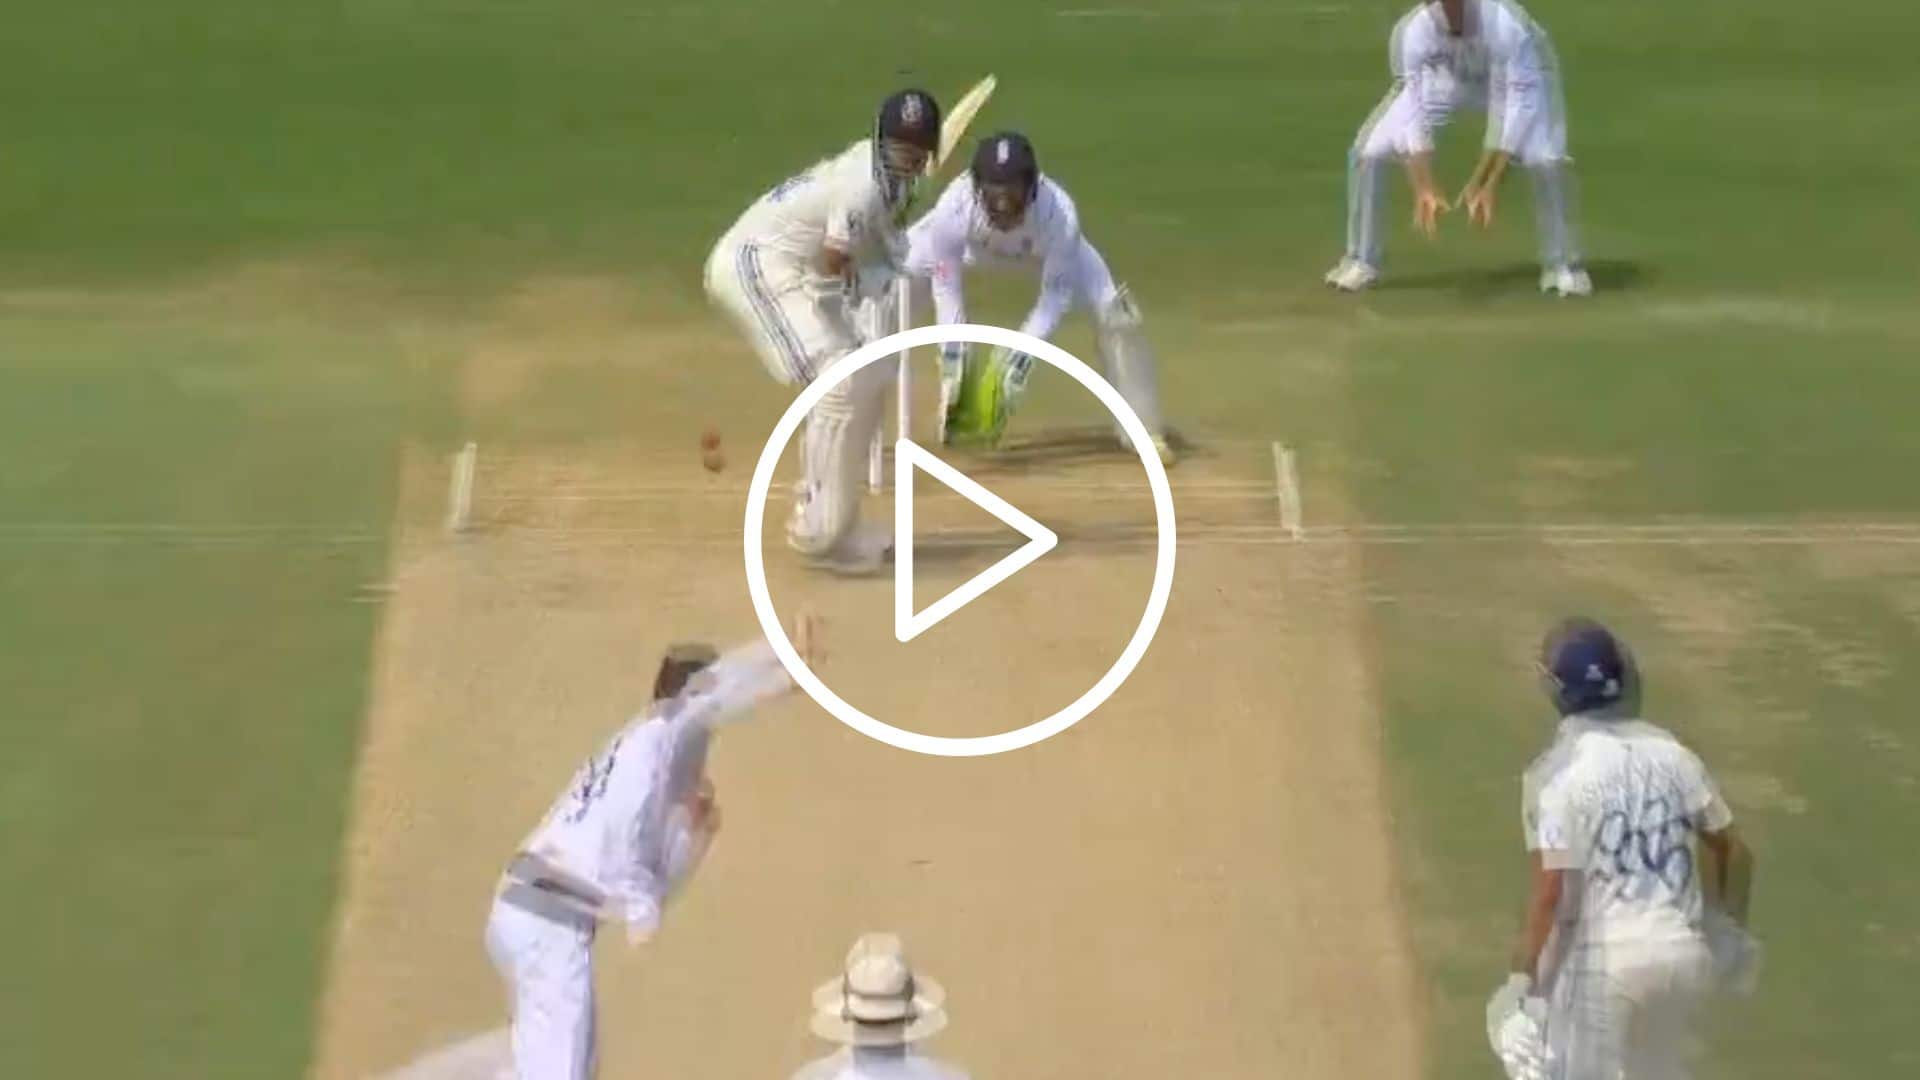 [Watch] Yashasvi Jaiswal 'Blasts' Tom Hartley For A Massive Six To Get To His Century vs ENG